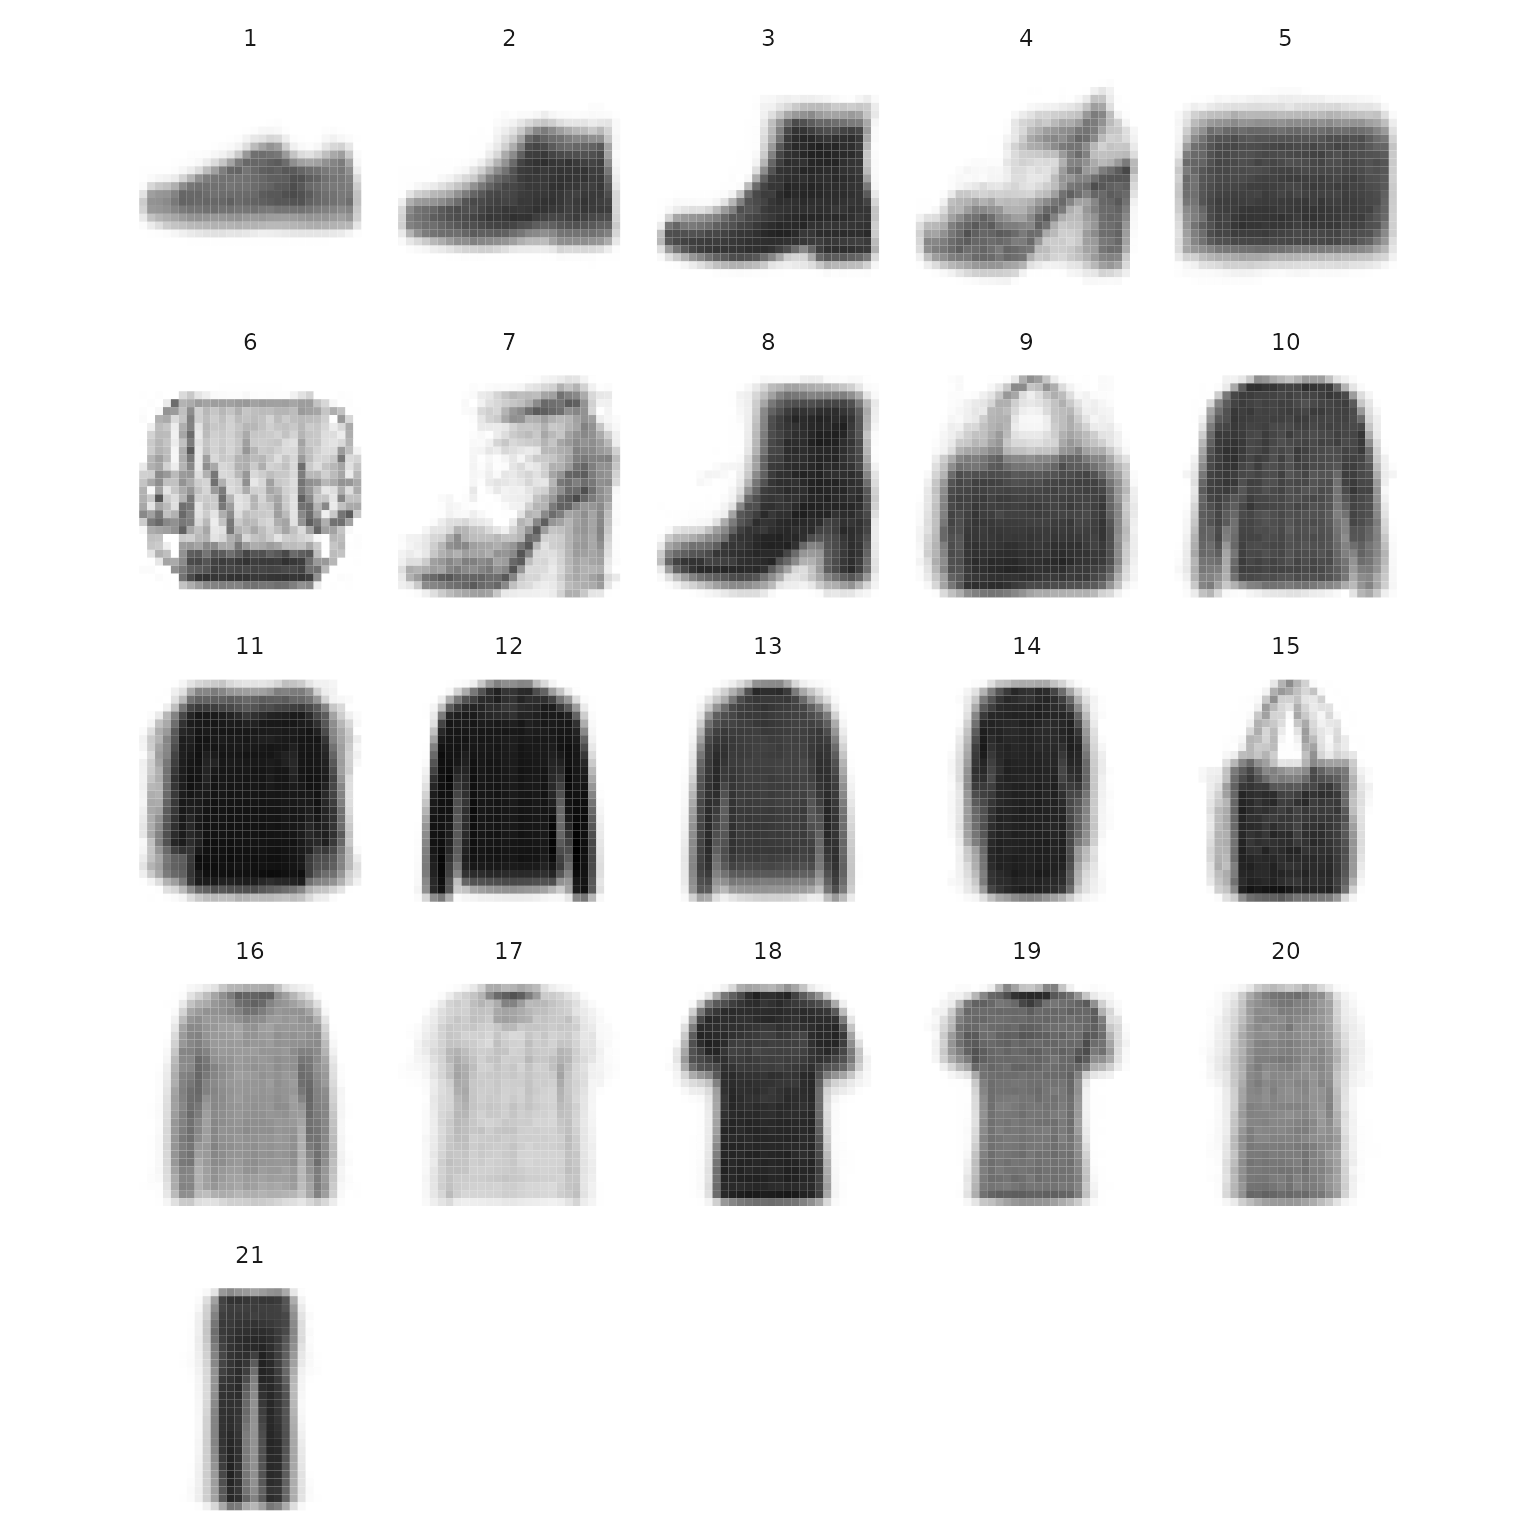 Visualization of the clusters centers extracted on the FashionMNIST data.